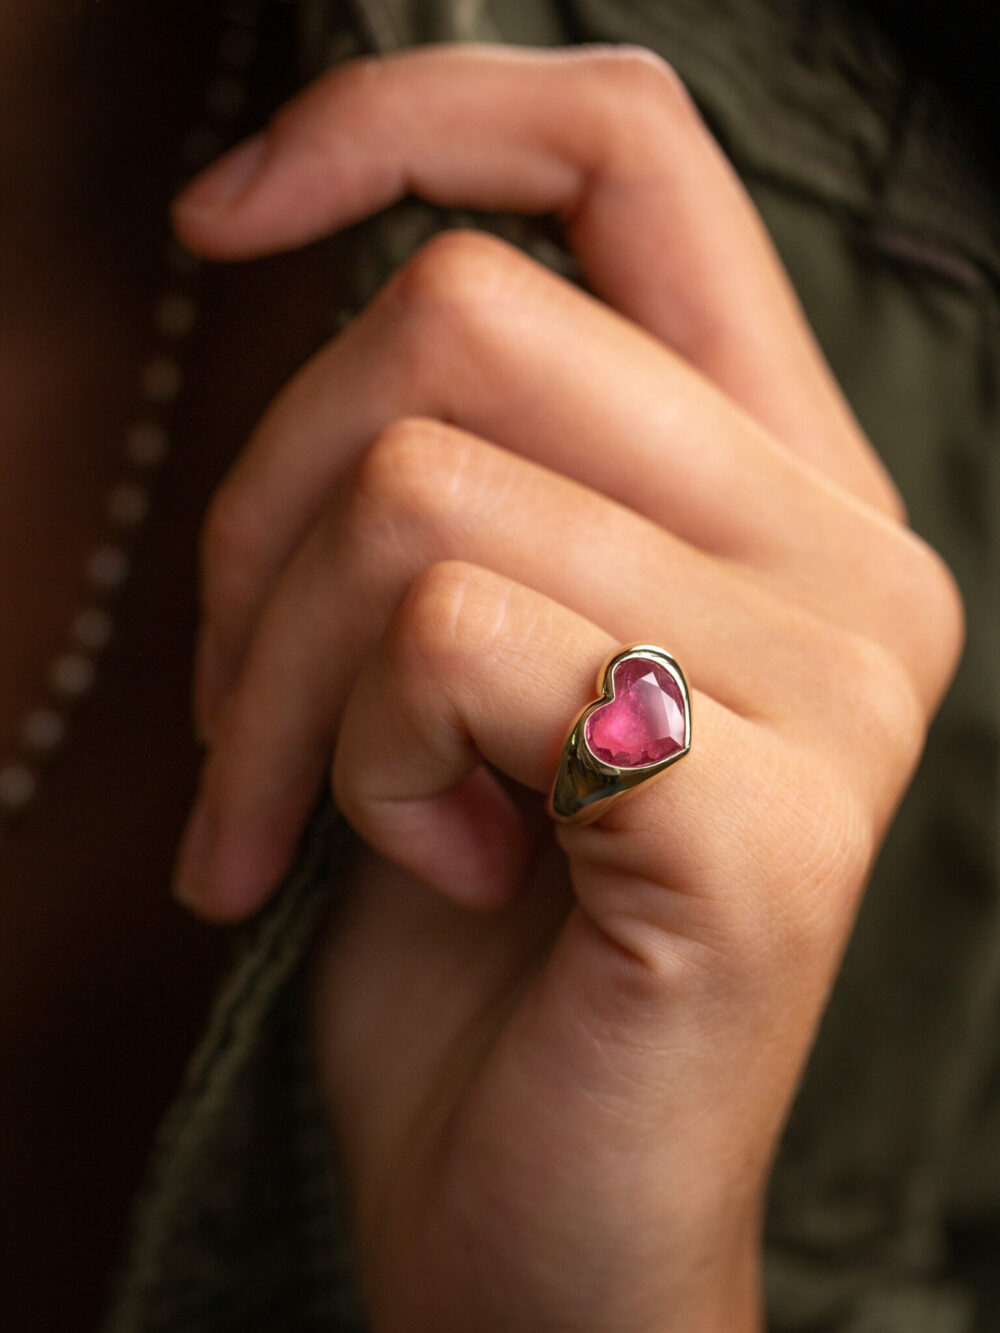 Carrie pink Tourmaline heart signet ring luj partis jewelry